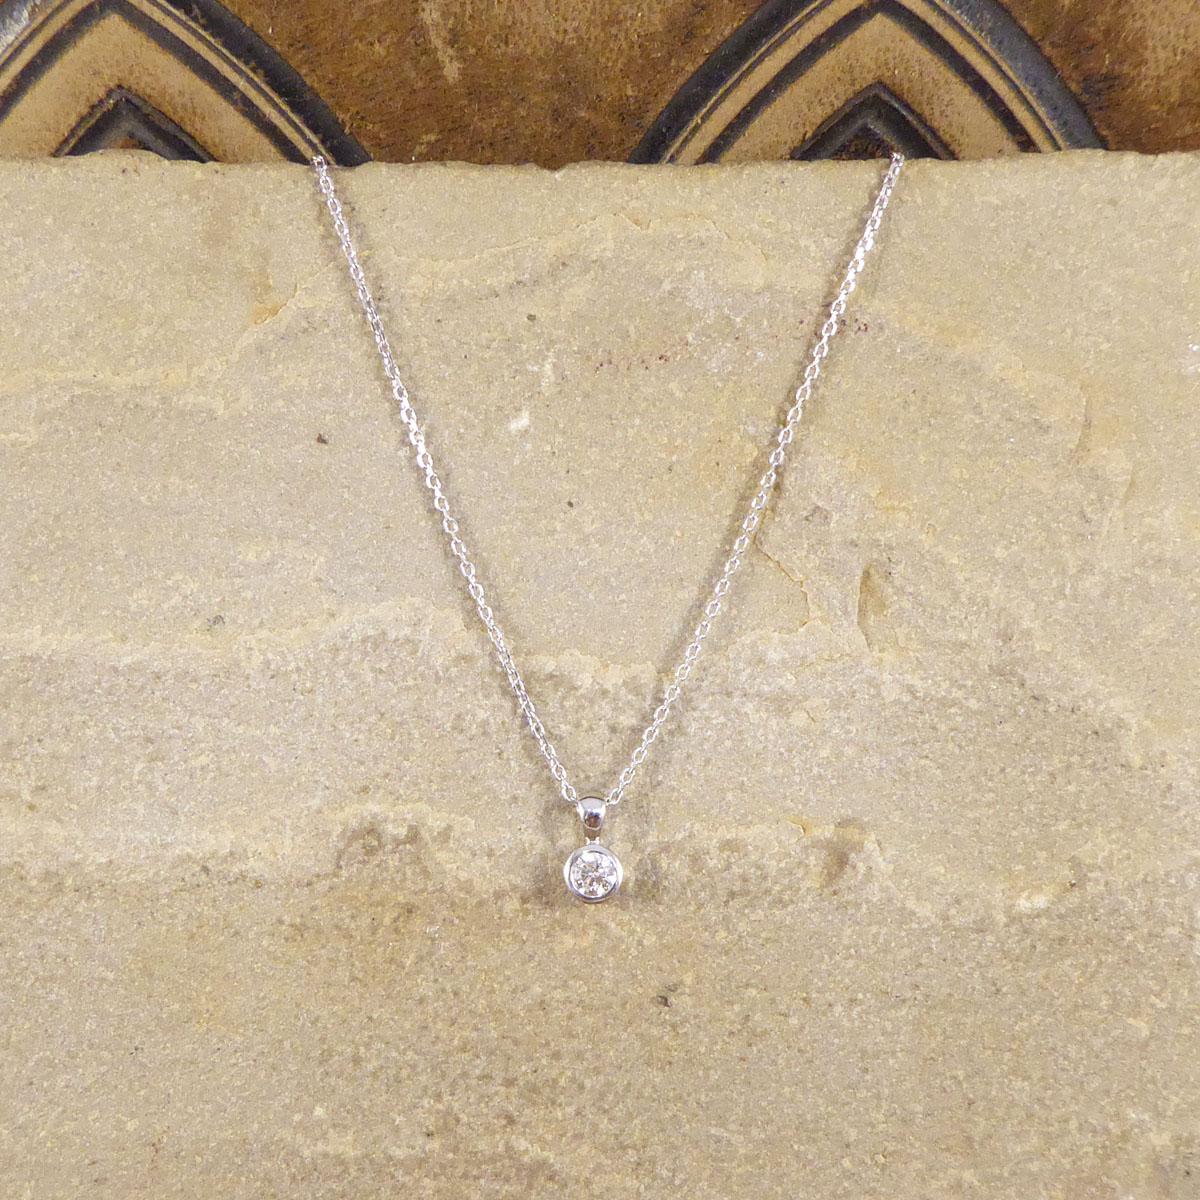 Hanging on a Contemporary 9ct White Gold Chain, sits a beautiful 0.25ct Diamond pendant. So elegant and dainty the 0.25ct Diamond is a Modern Brilliant Cut and is clean and bright. It is set in a rub over 9ct White Gold setting giving it the